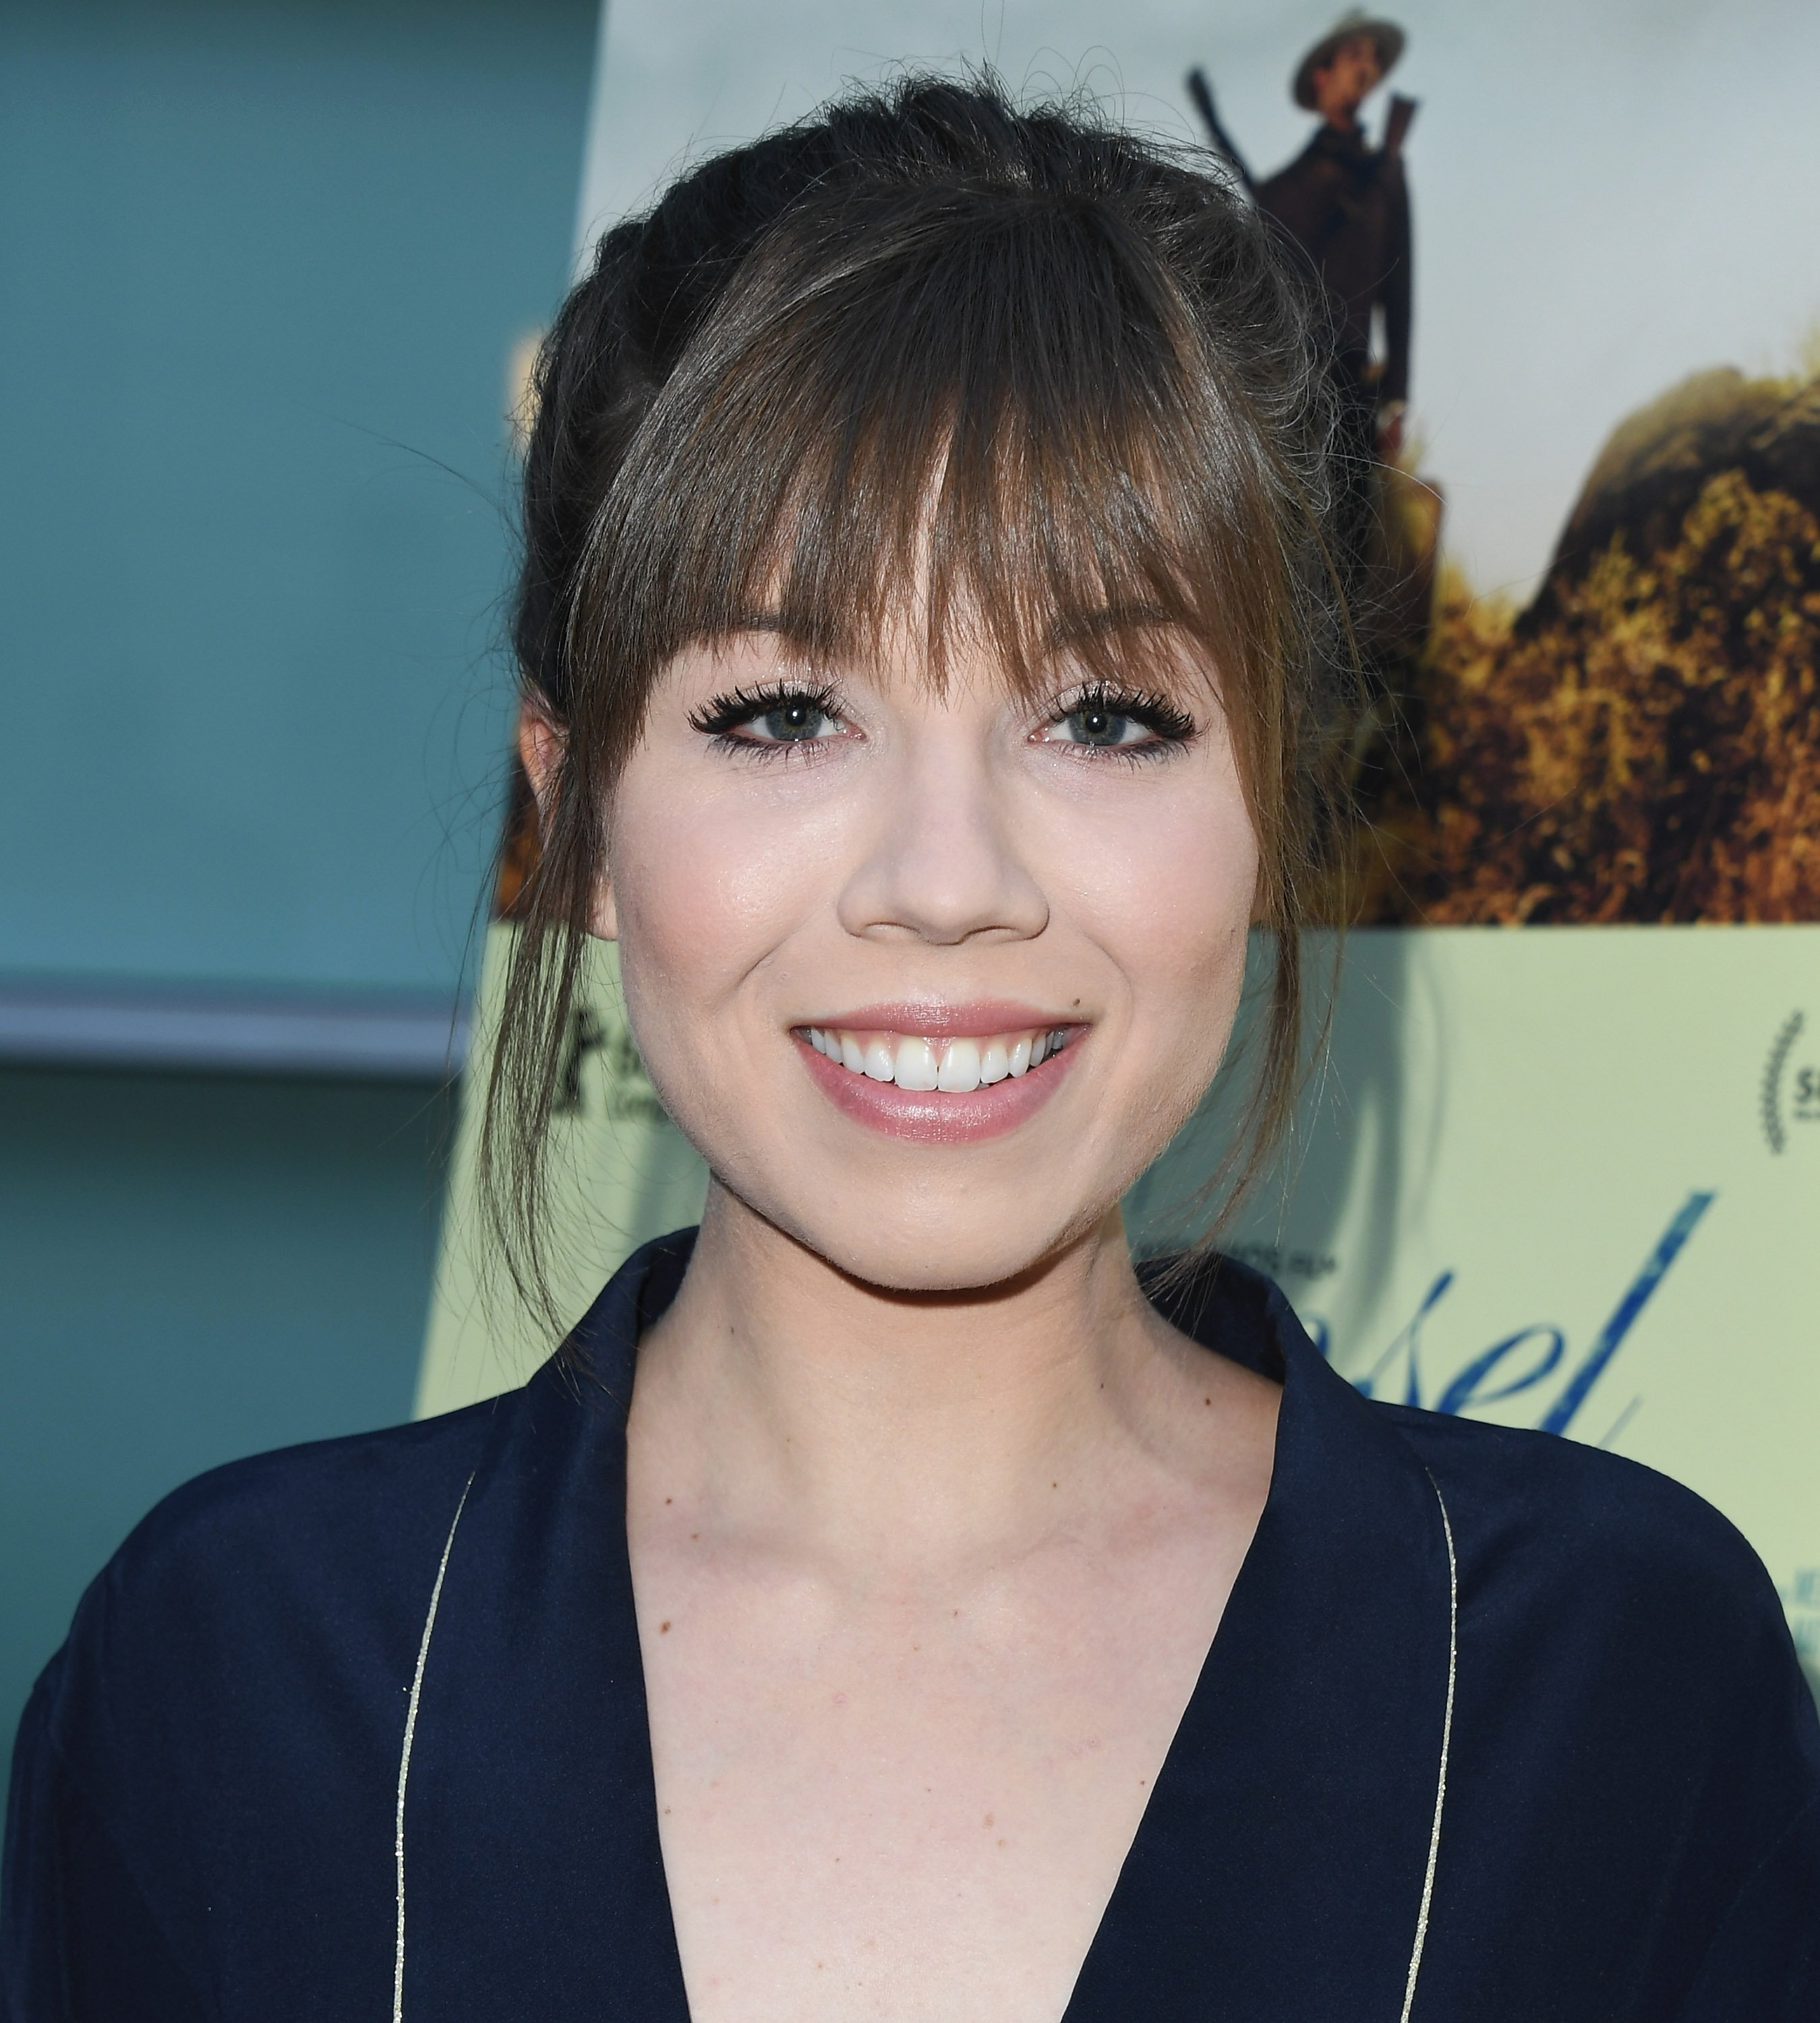 Jennette McCurdy at the premiere of "Damsel" on June 13, 2018 | Source: Getty Images